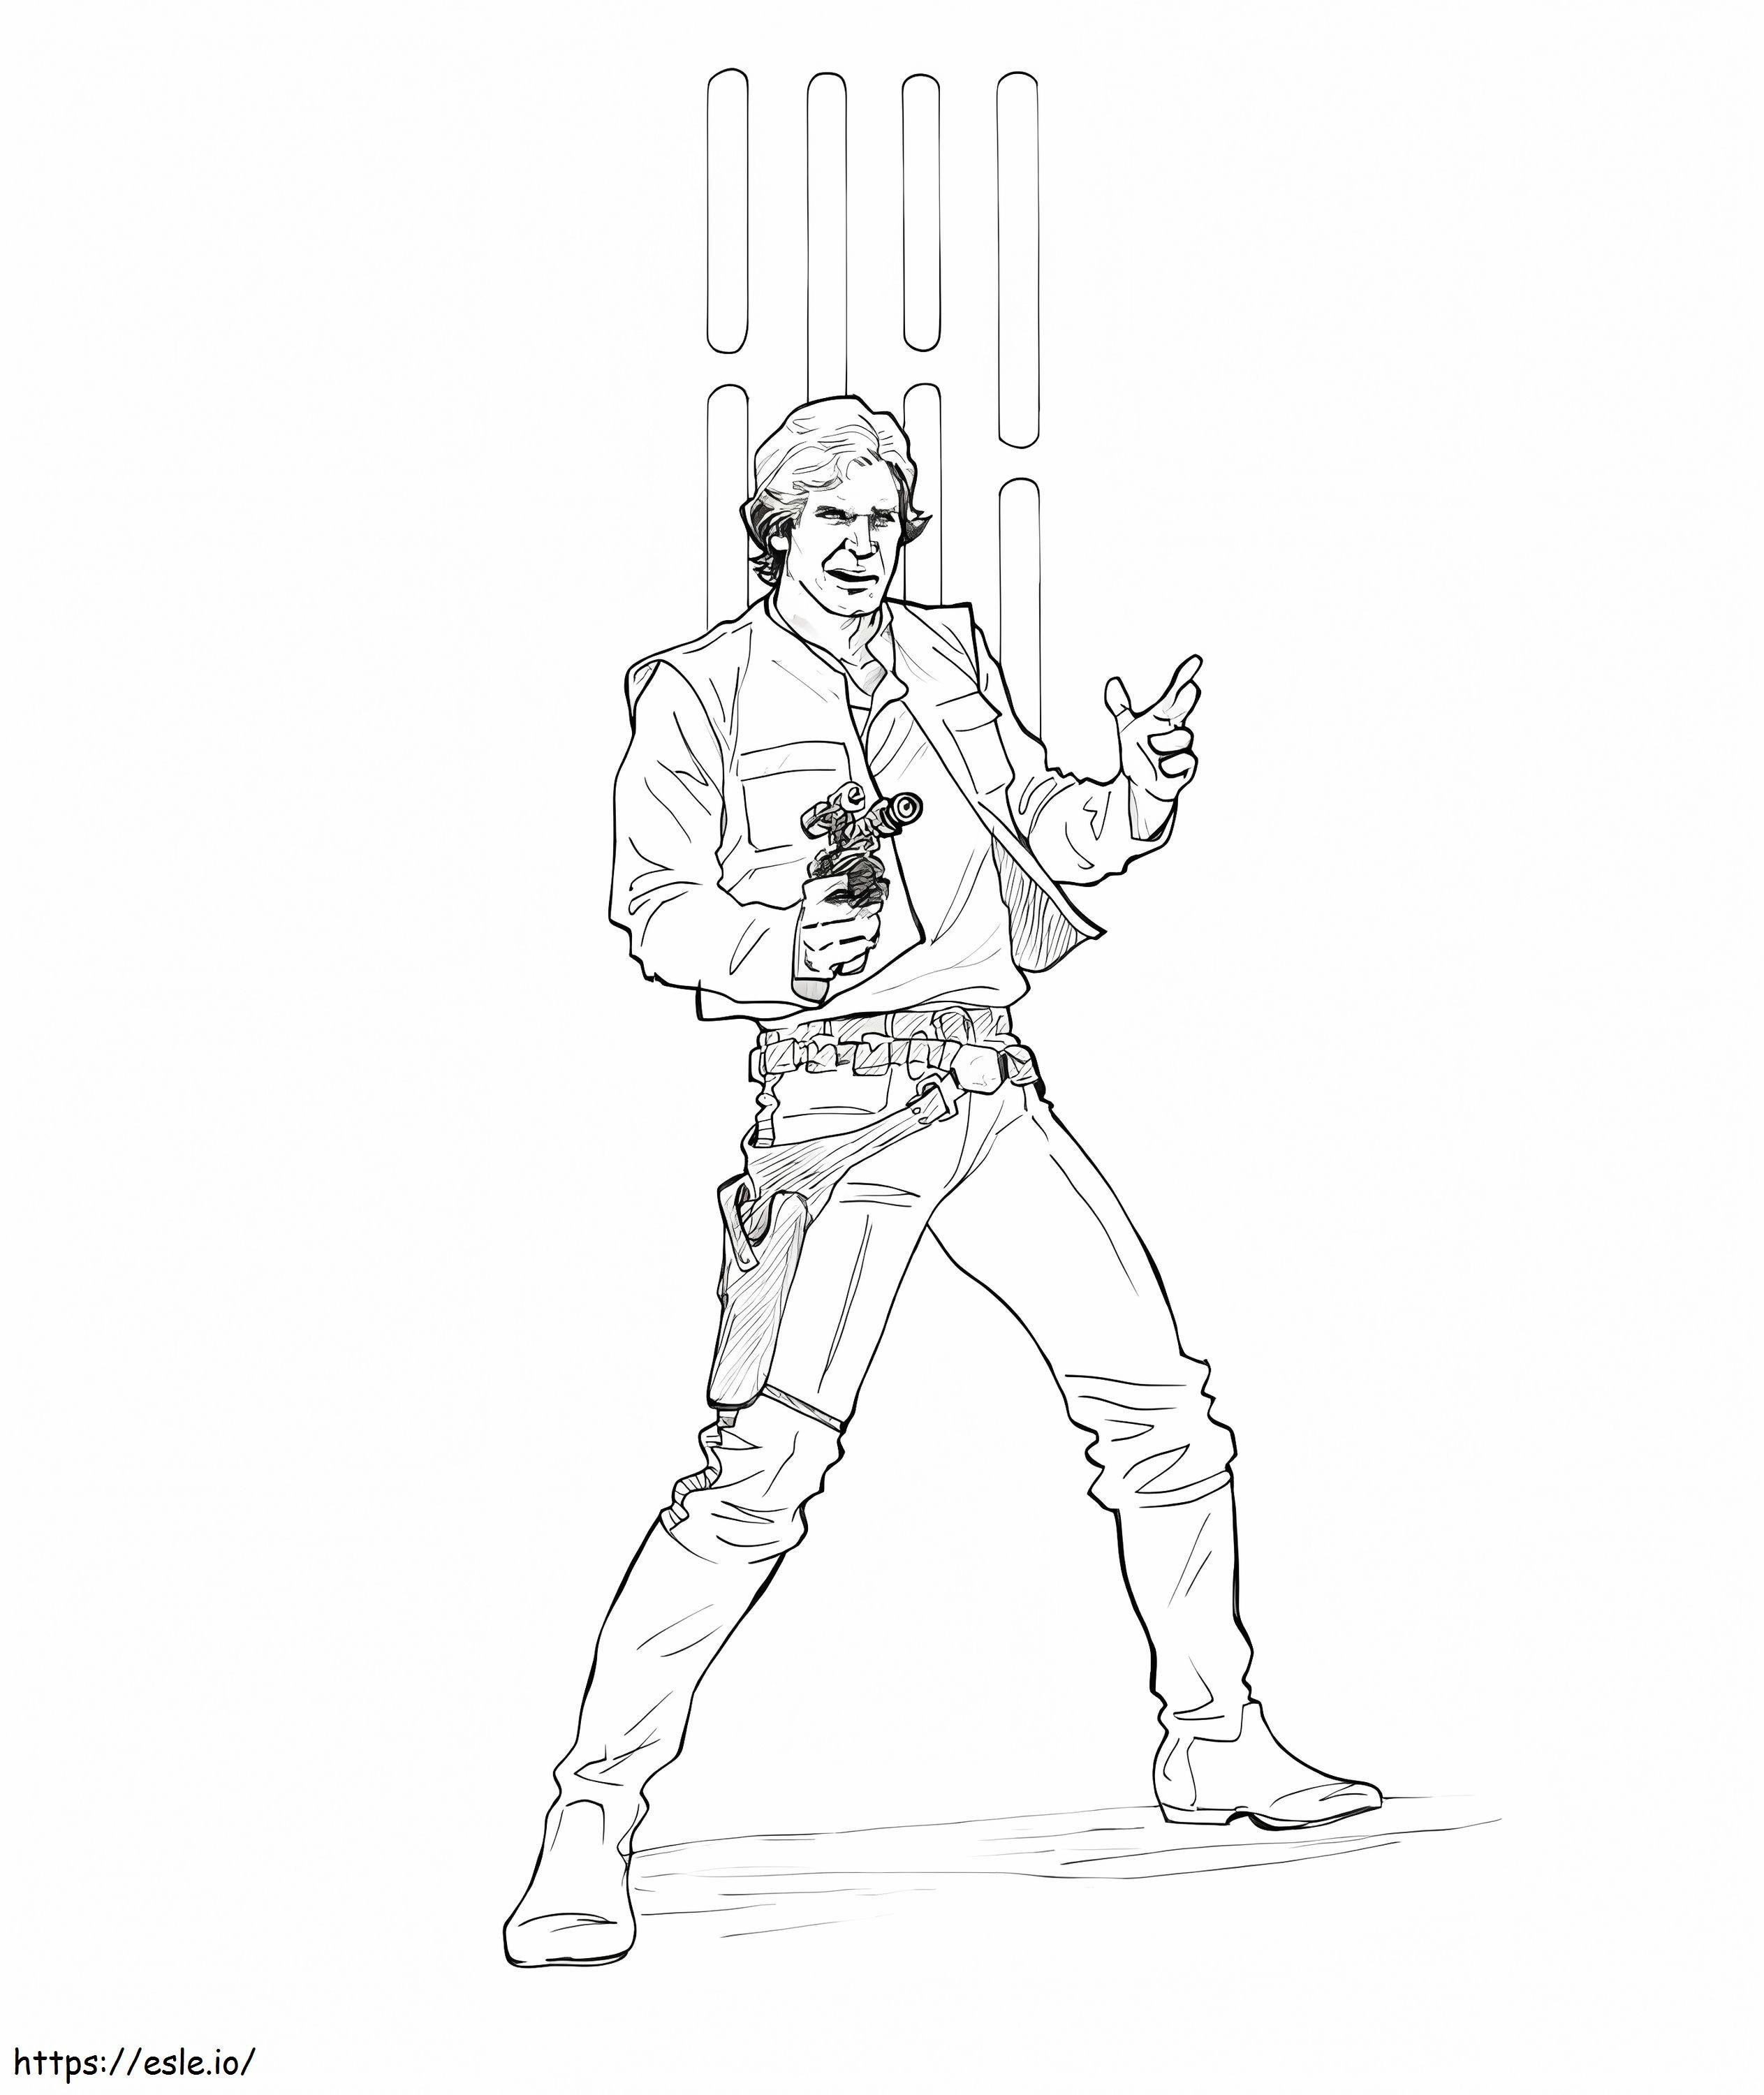 Awesome Han Solo coloring page